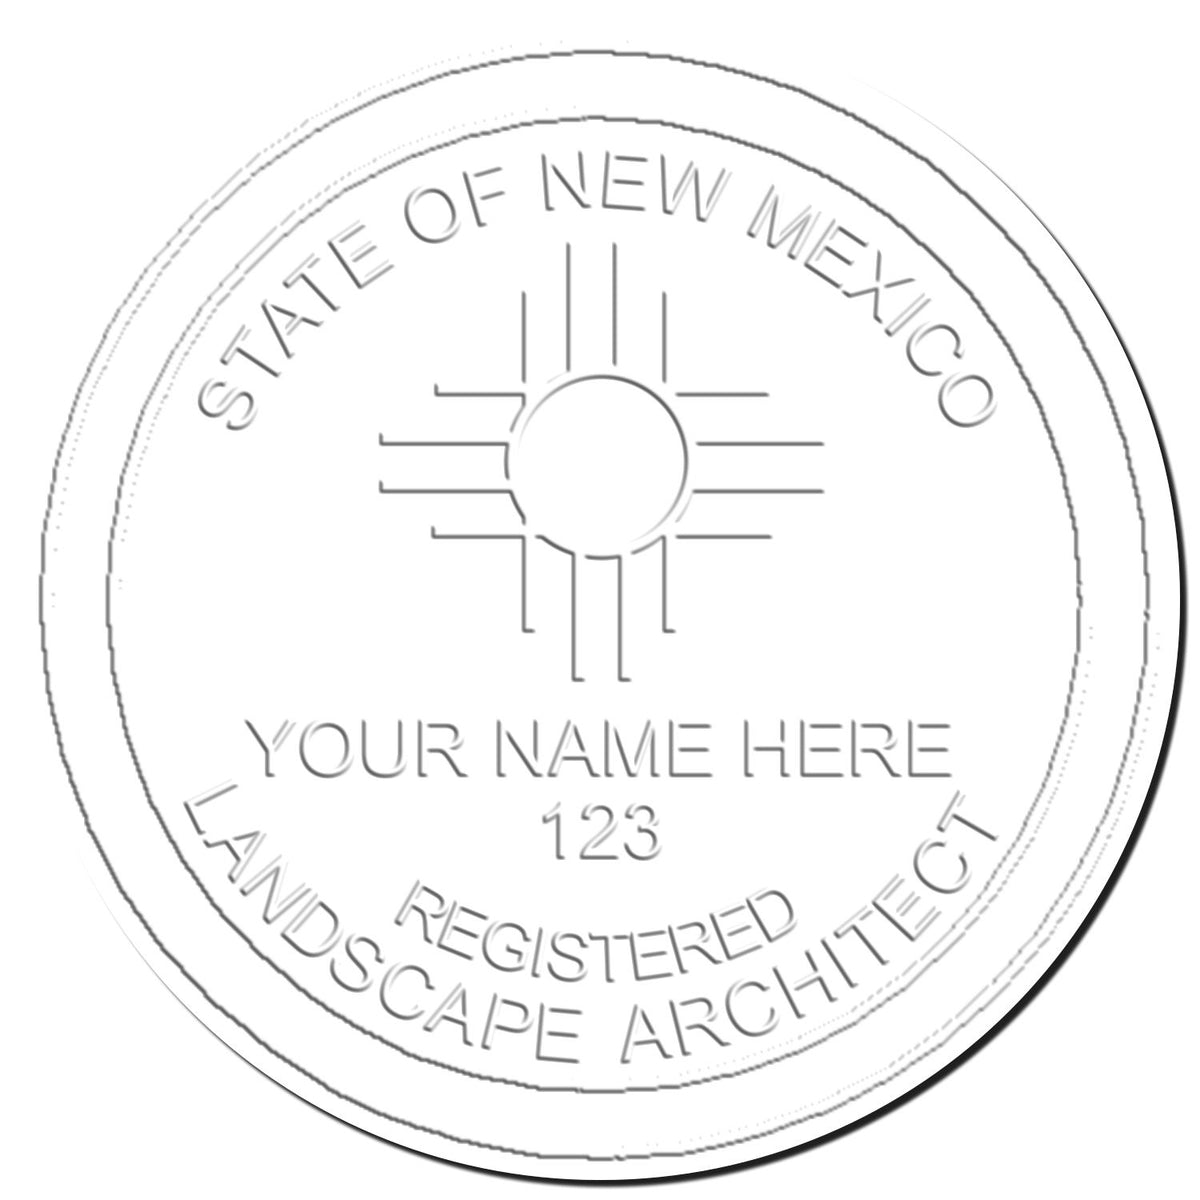 This paper is stamped with a sample imprint of the Gift New Mexico Landscape Architect Seal, signifying its quality and reliability.